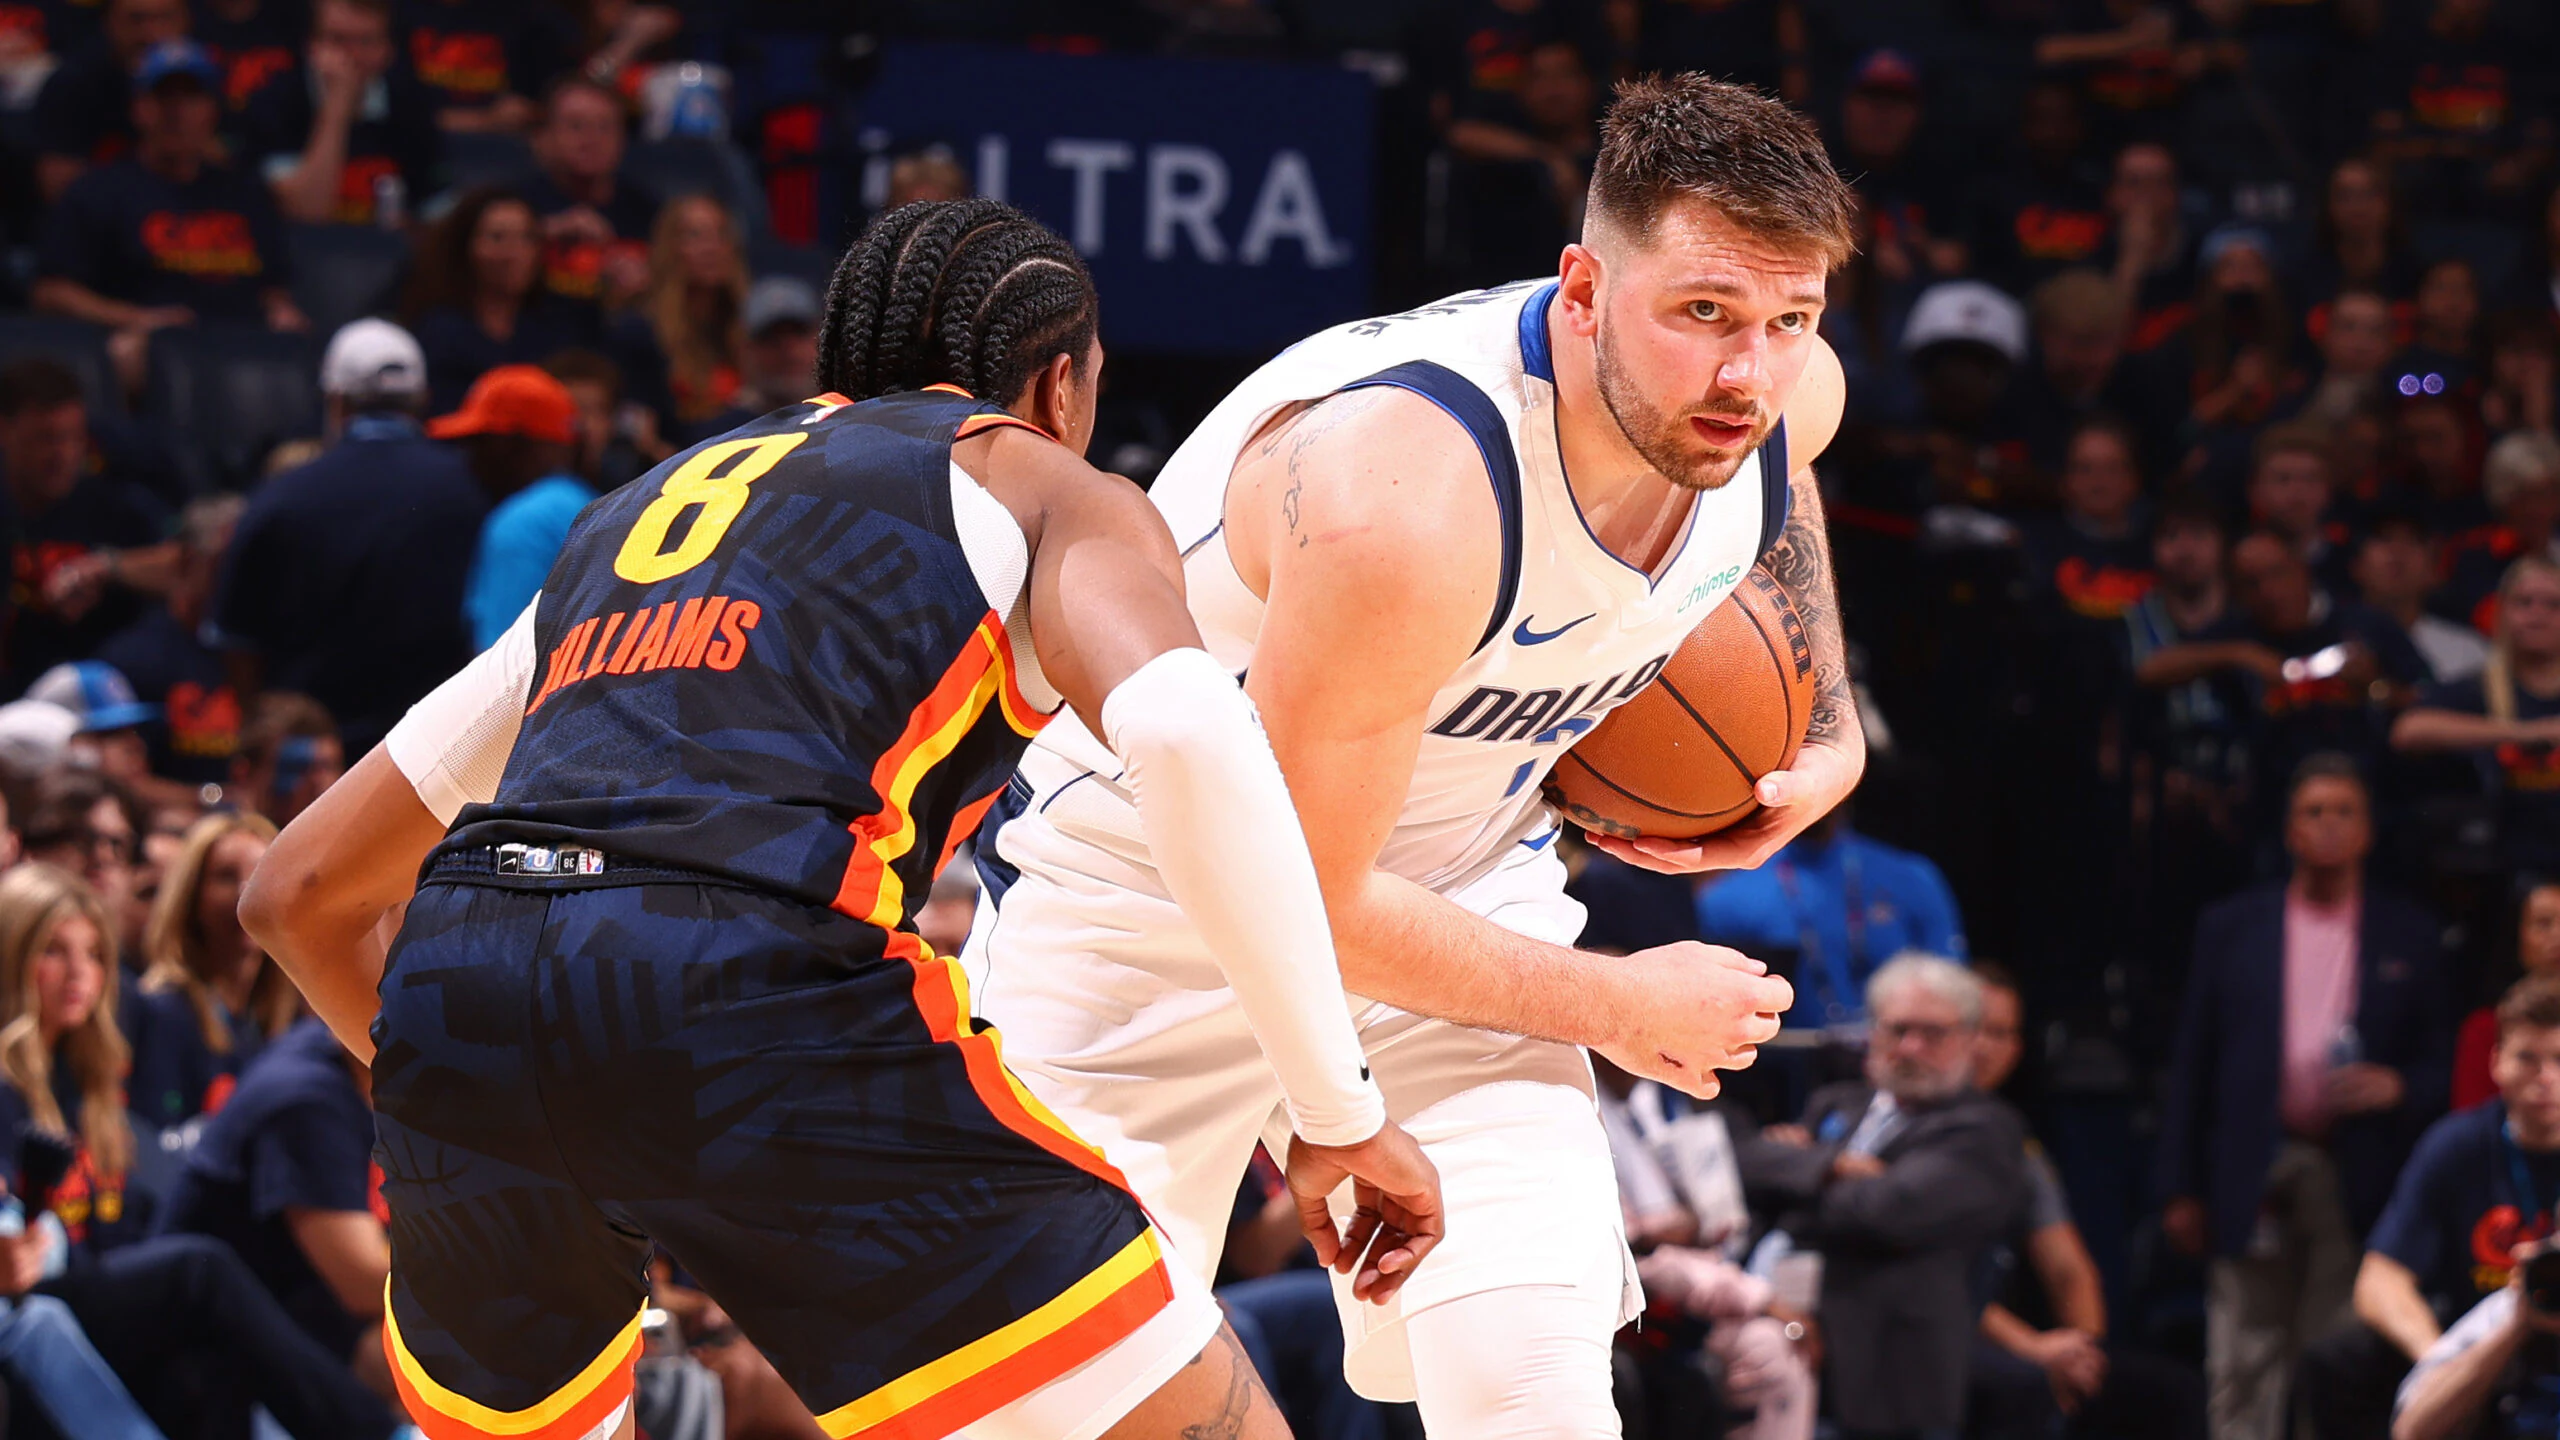 Doncic leads Mavs to Game 5 win, 3-2 lead on Thunder